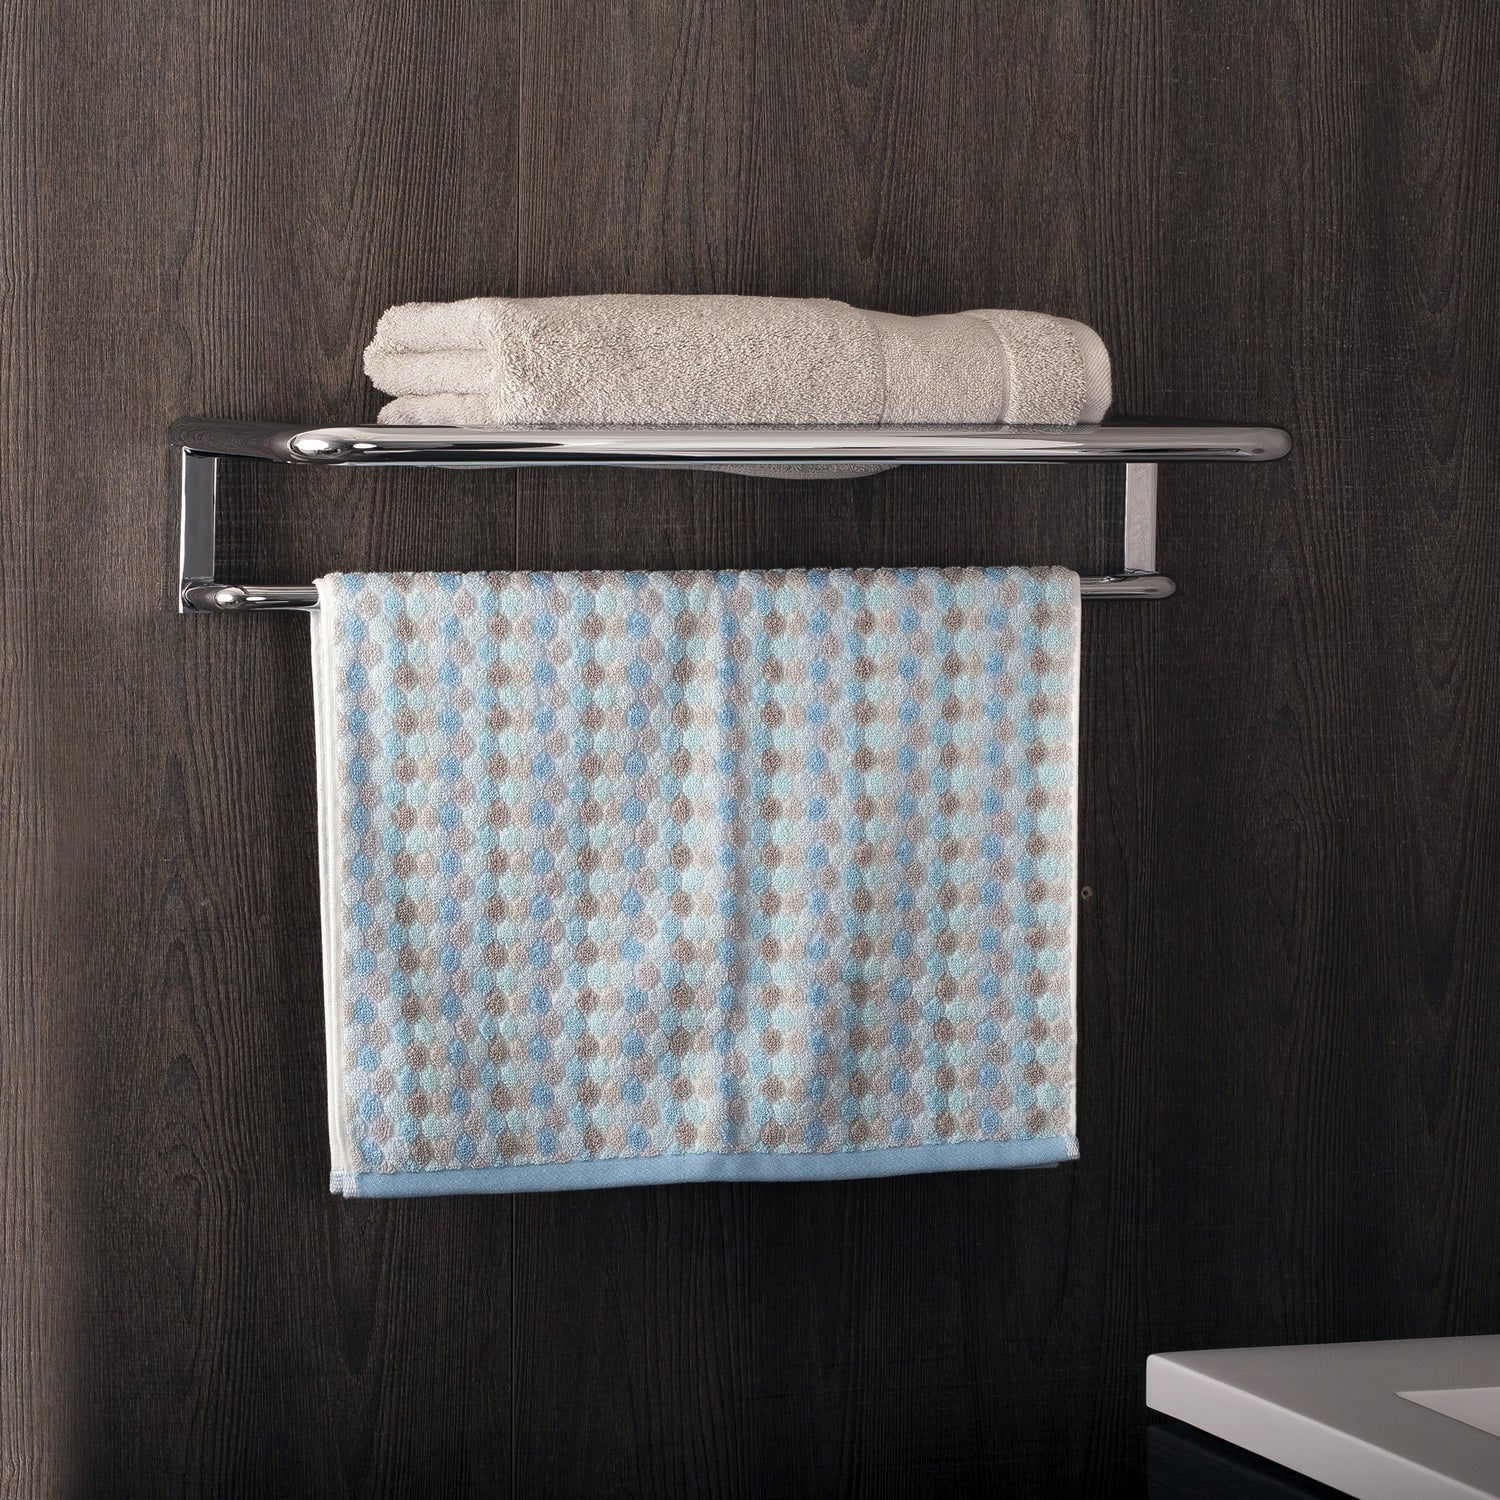 COSMIC Project  Towel Rack with Shelf, Wall Mount, Brass Body, Chrome Finish, 23-5/8 x 4-5/16 x 9-13/16 Inches (2510168)